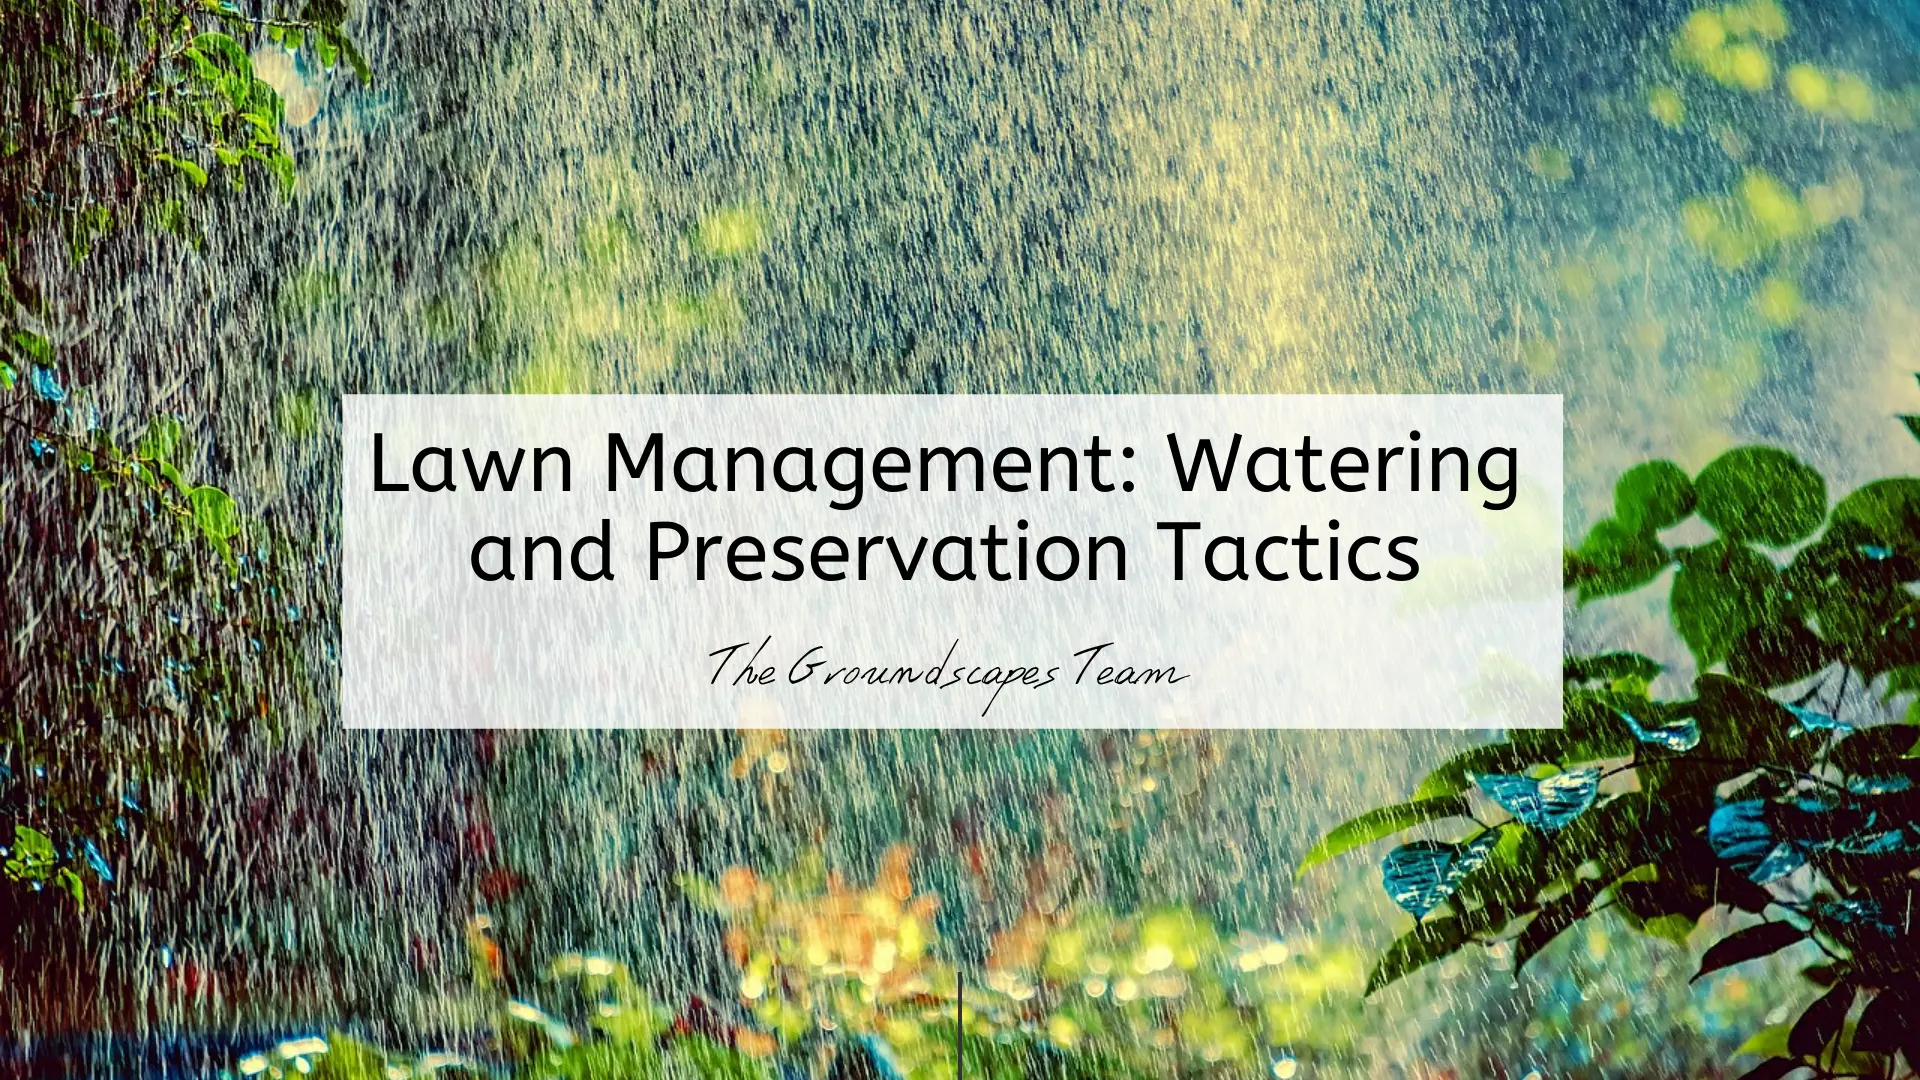 Basic Lawn Management: Watering and Preservation Tactics